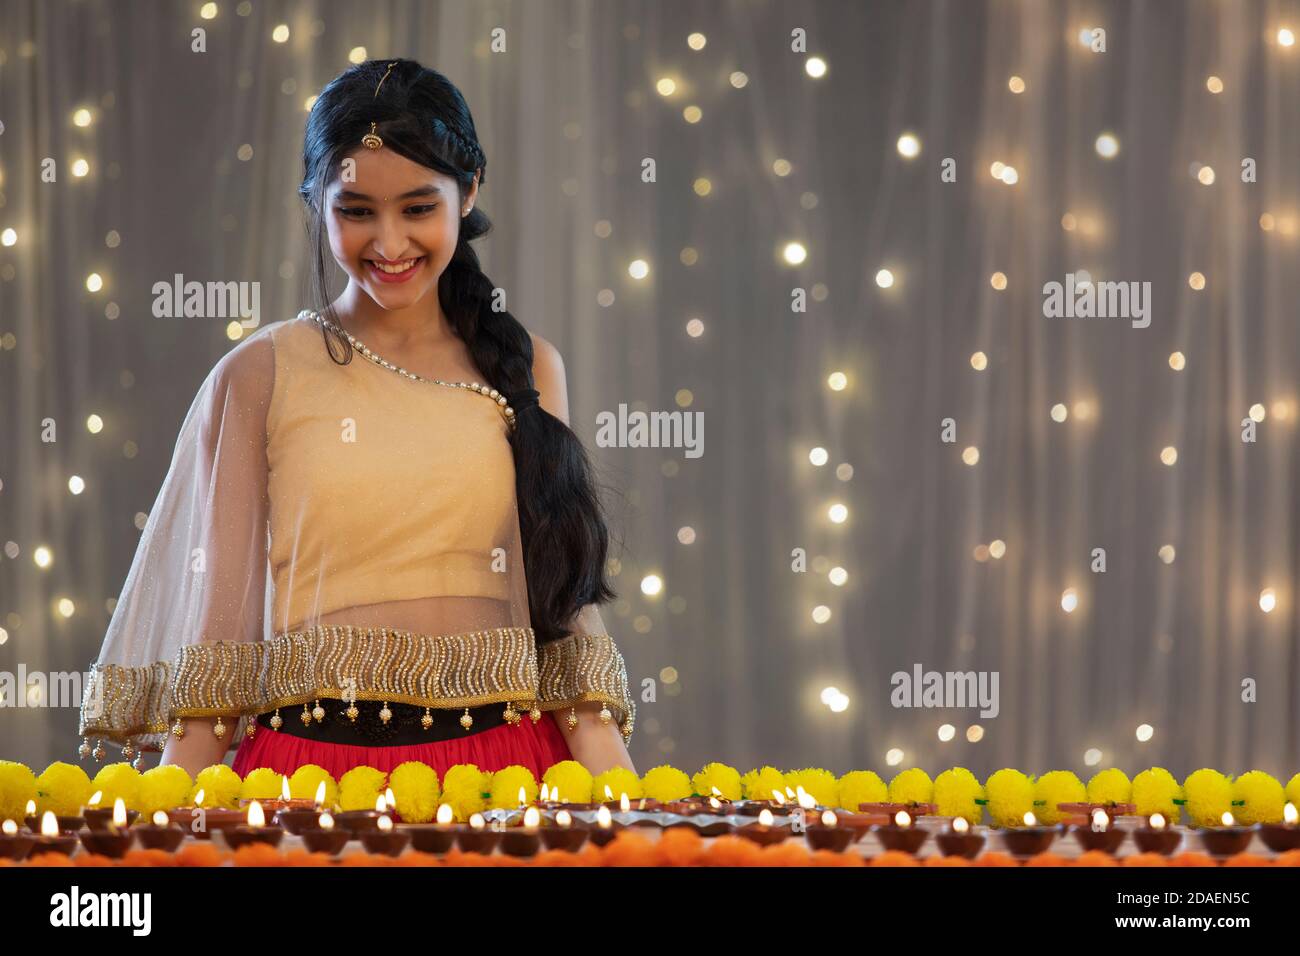 Beautiful young girl looking and smiling at Diwali decorations Stock Photo